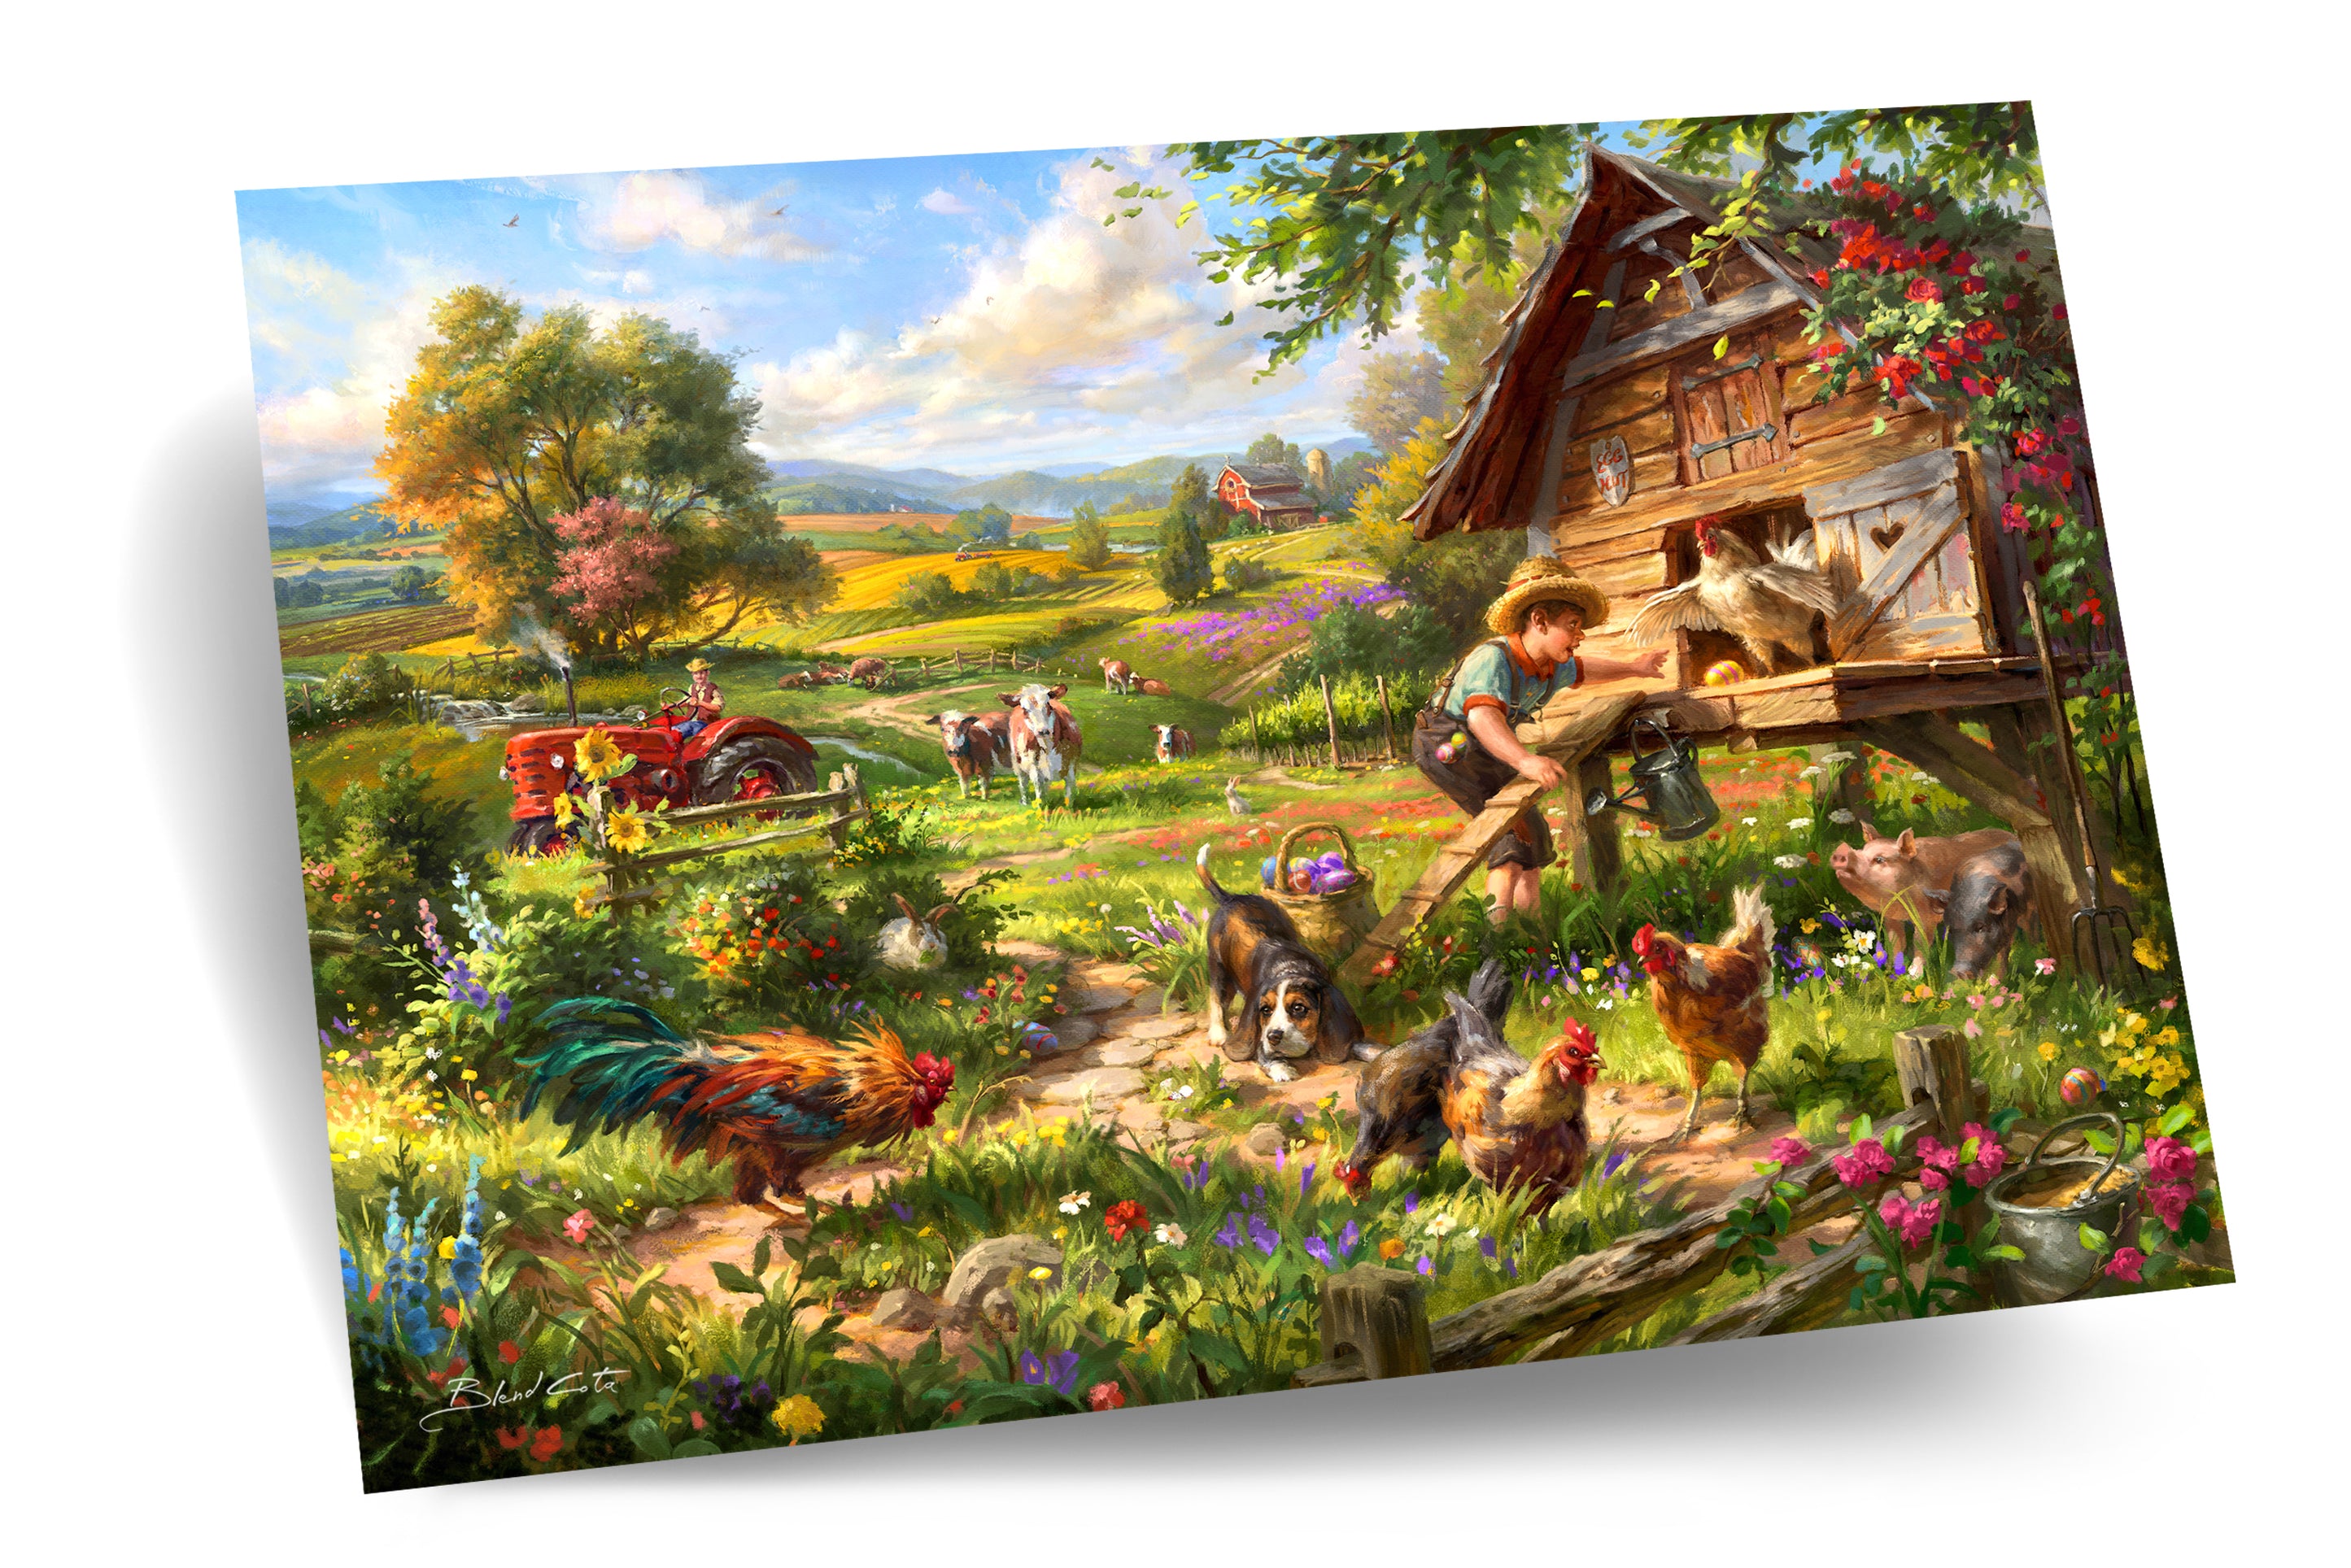 A boy searching for eggs in the Easter hunt, with his dog by his side, the farmyard is filled with animals and color, painting in a realistic Americana style.